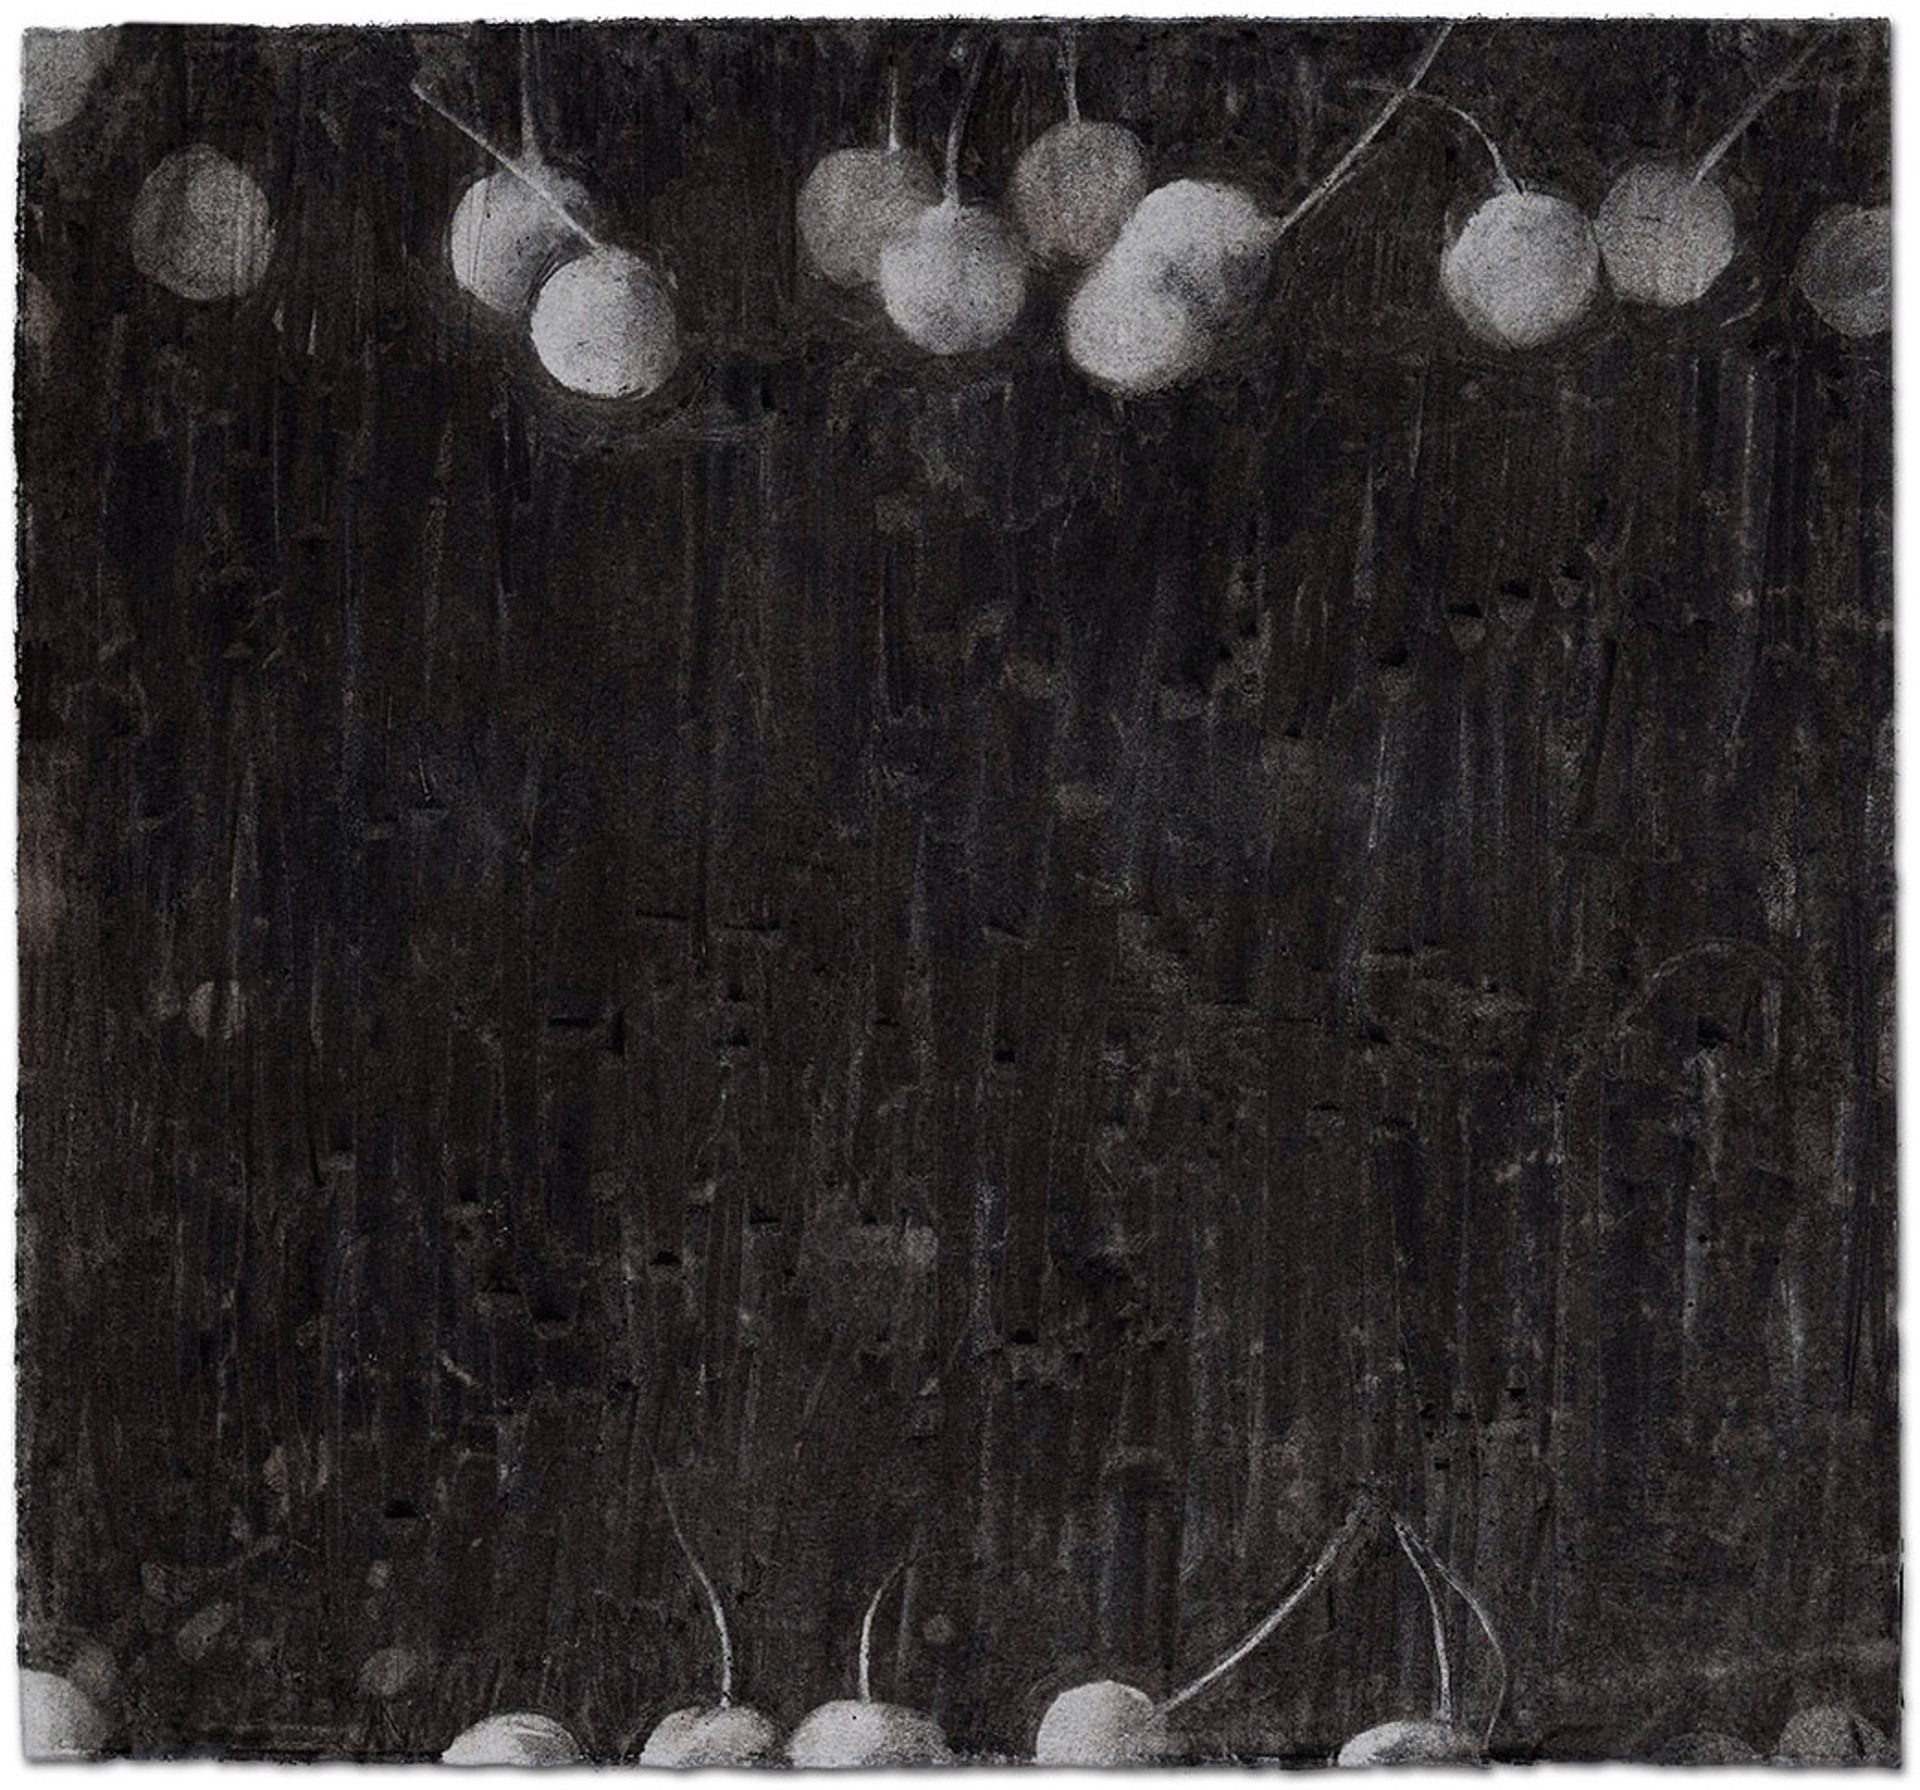 Untitled, Black Drawing #12 by Kathy Moss